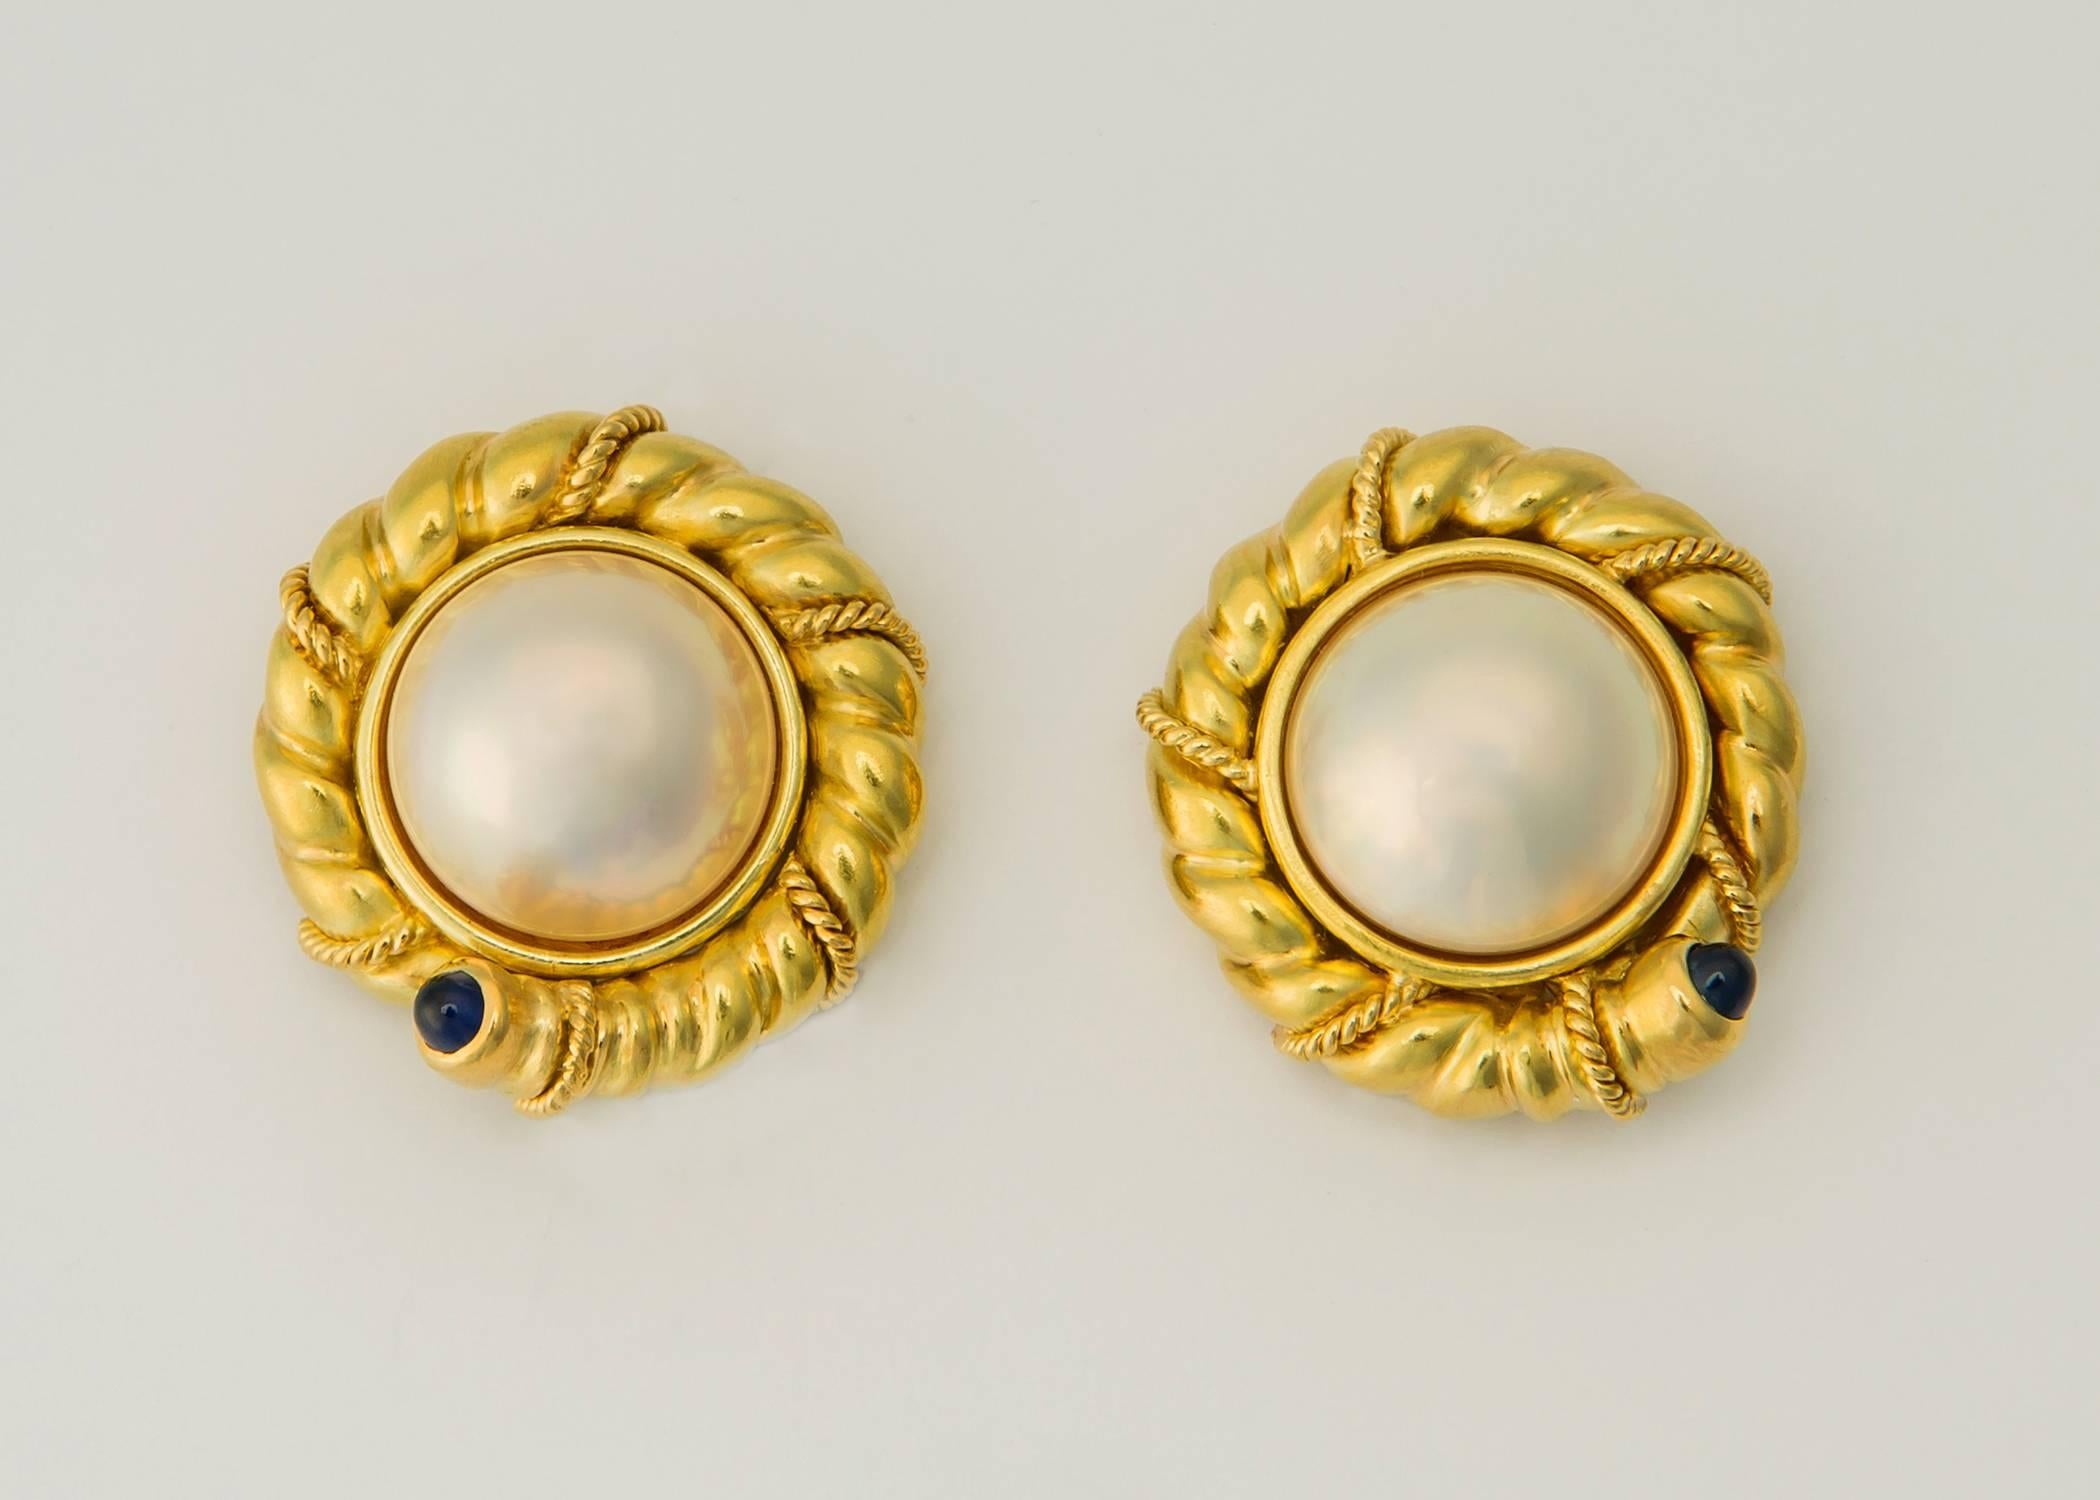 Tiffany style and quality. A beautiful 14.50mm mabe pearl is framed with rich 18k gold and finished with a cabochon cut blue sapphire. 7/8's of an inch of classic design. 